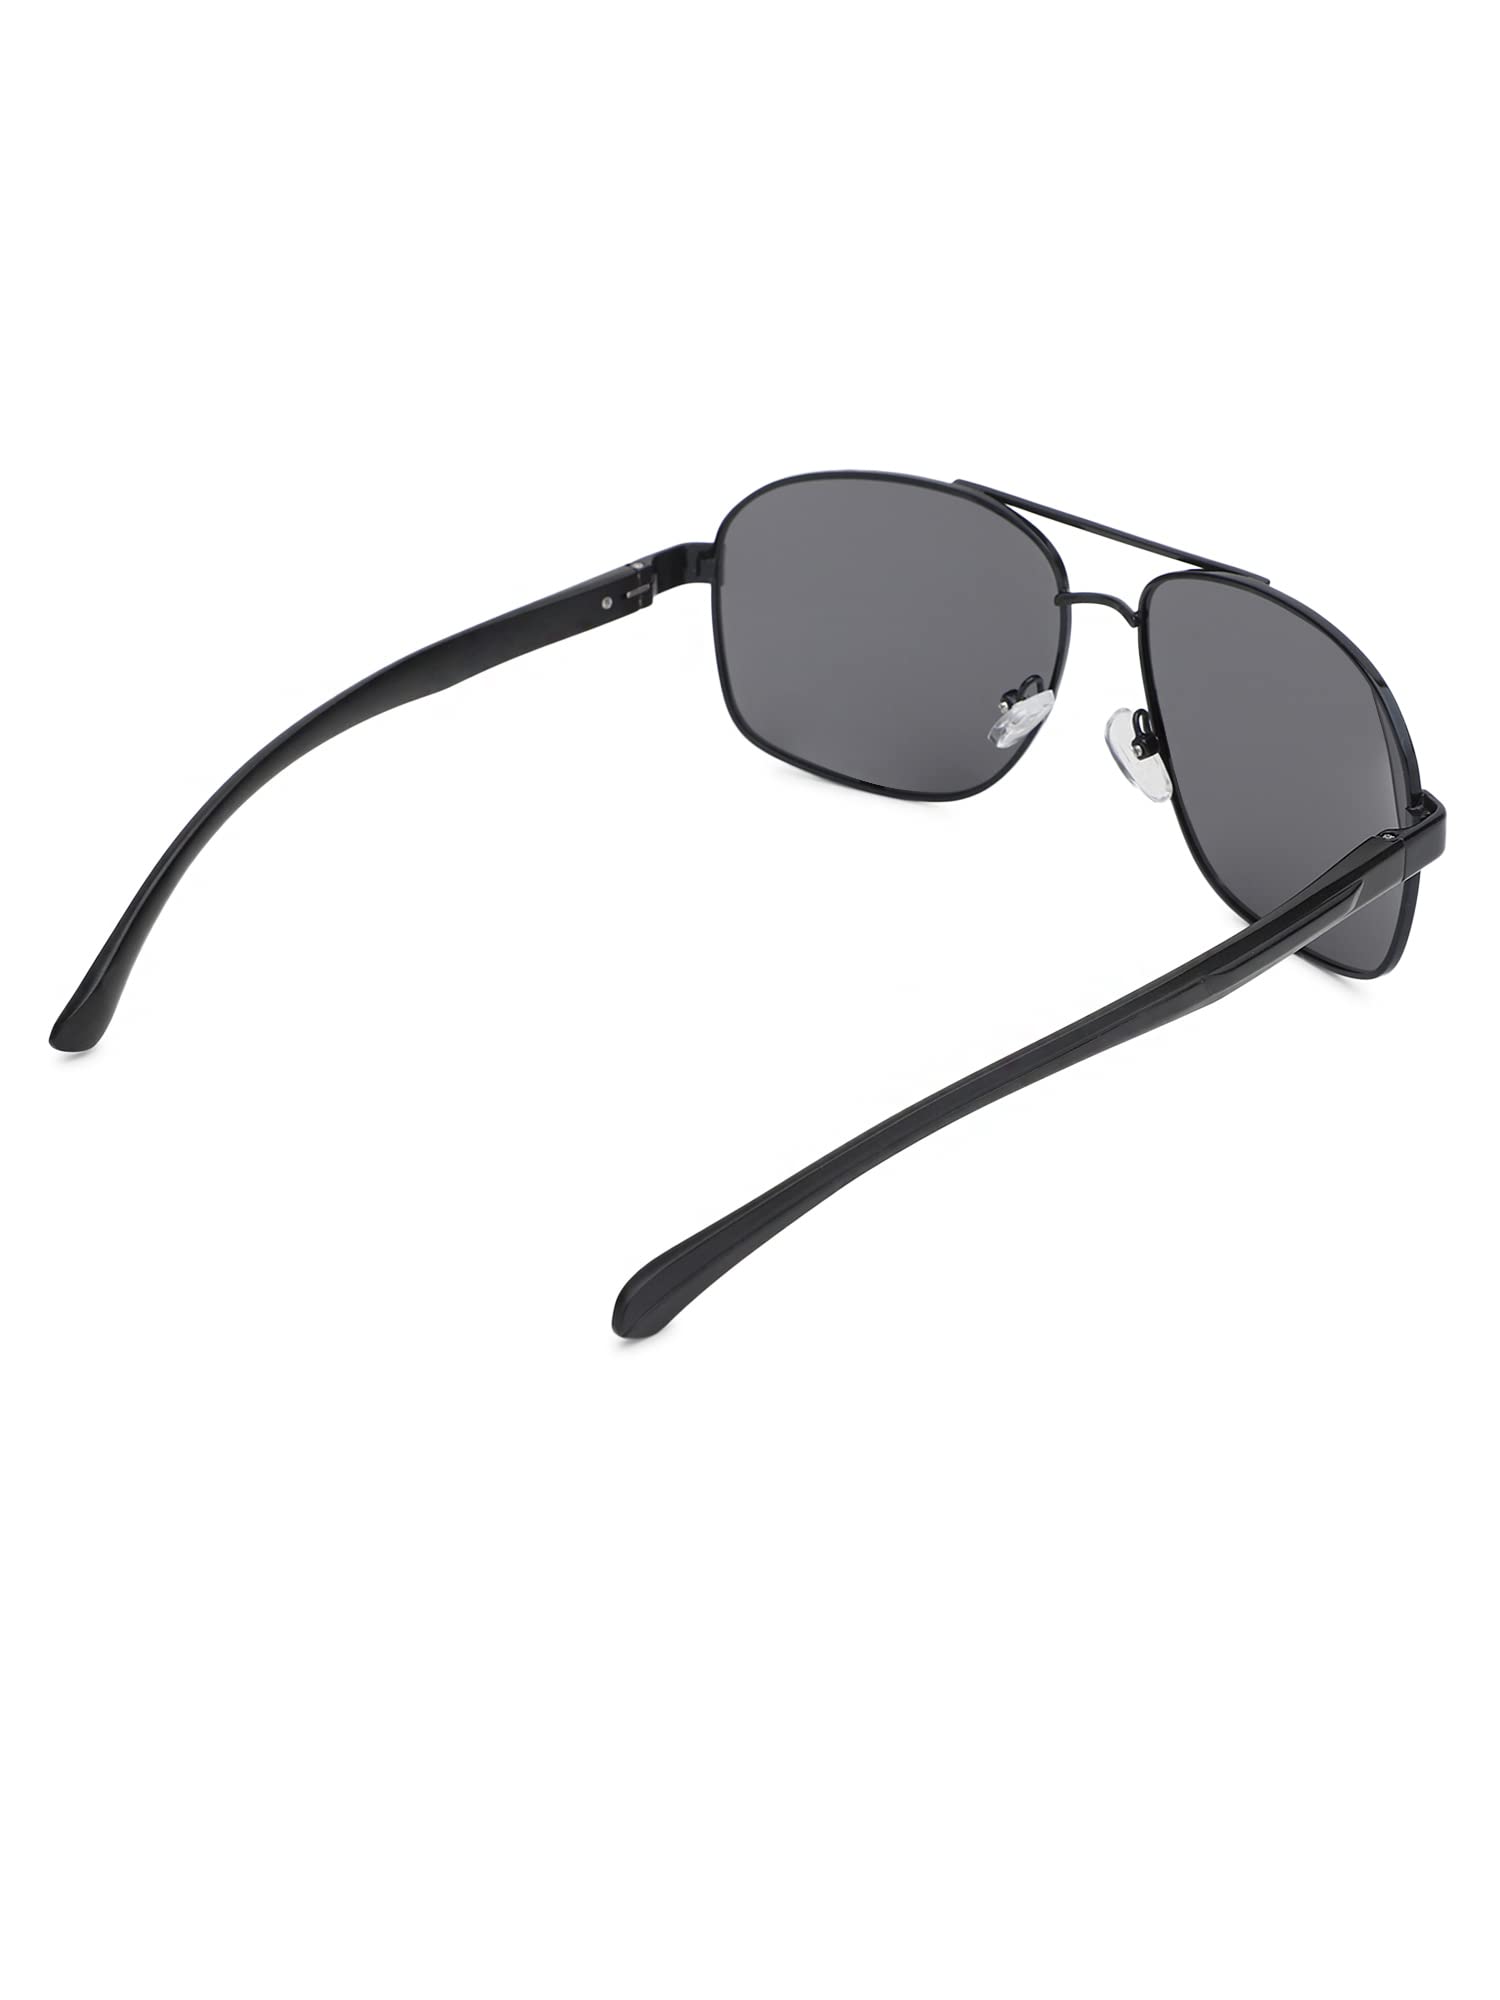 Intellilens | Branded Latest and Stylish Sunglasses | Polarized and 100% UV  Protected | Light Weight, Durable, Premium Looks |Women | Black Lenses 